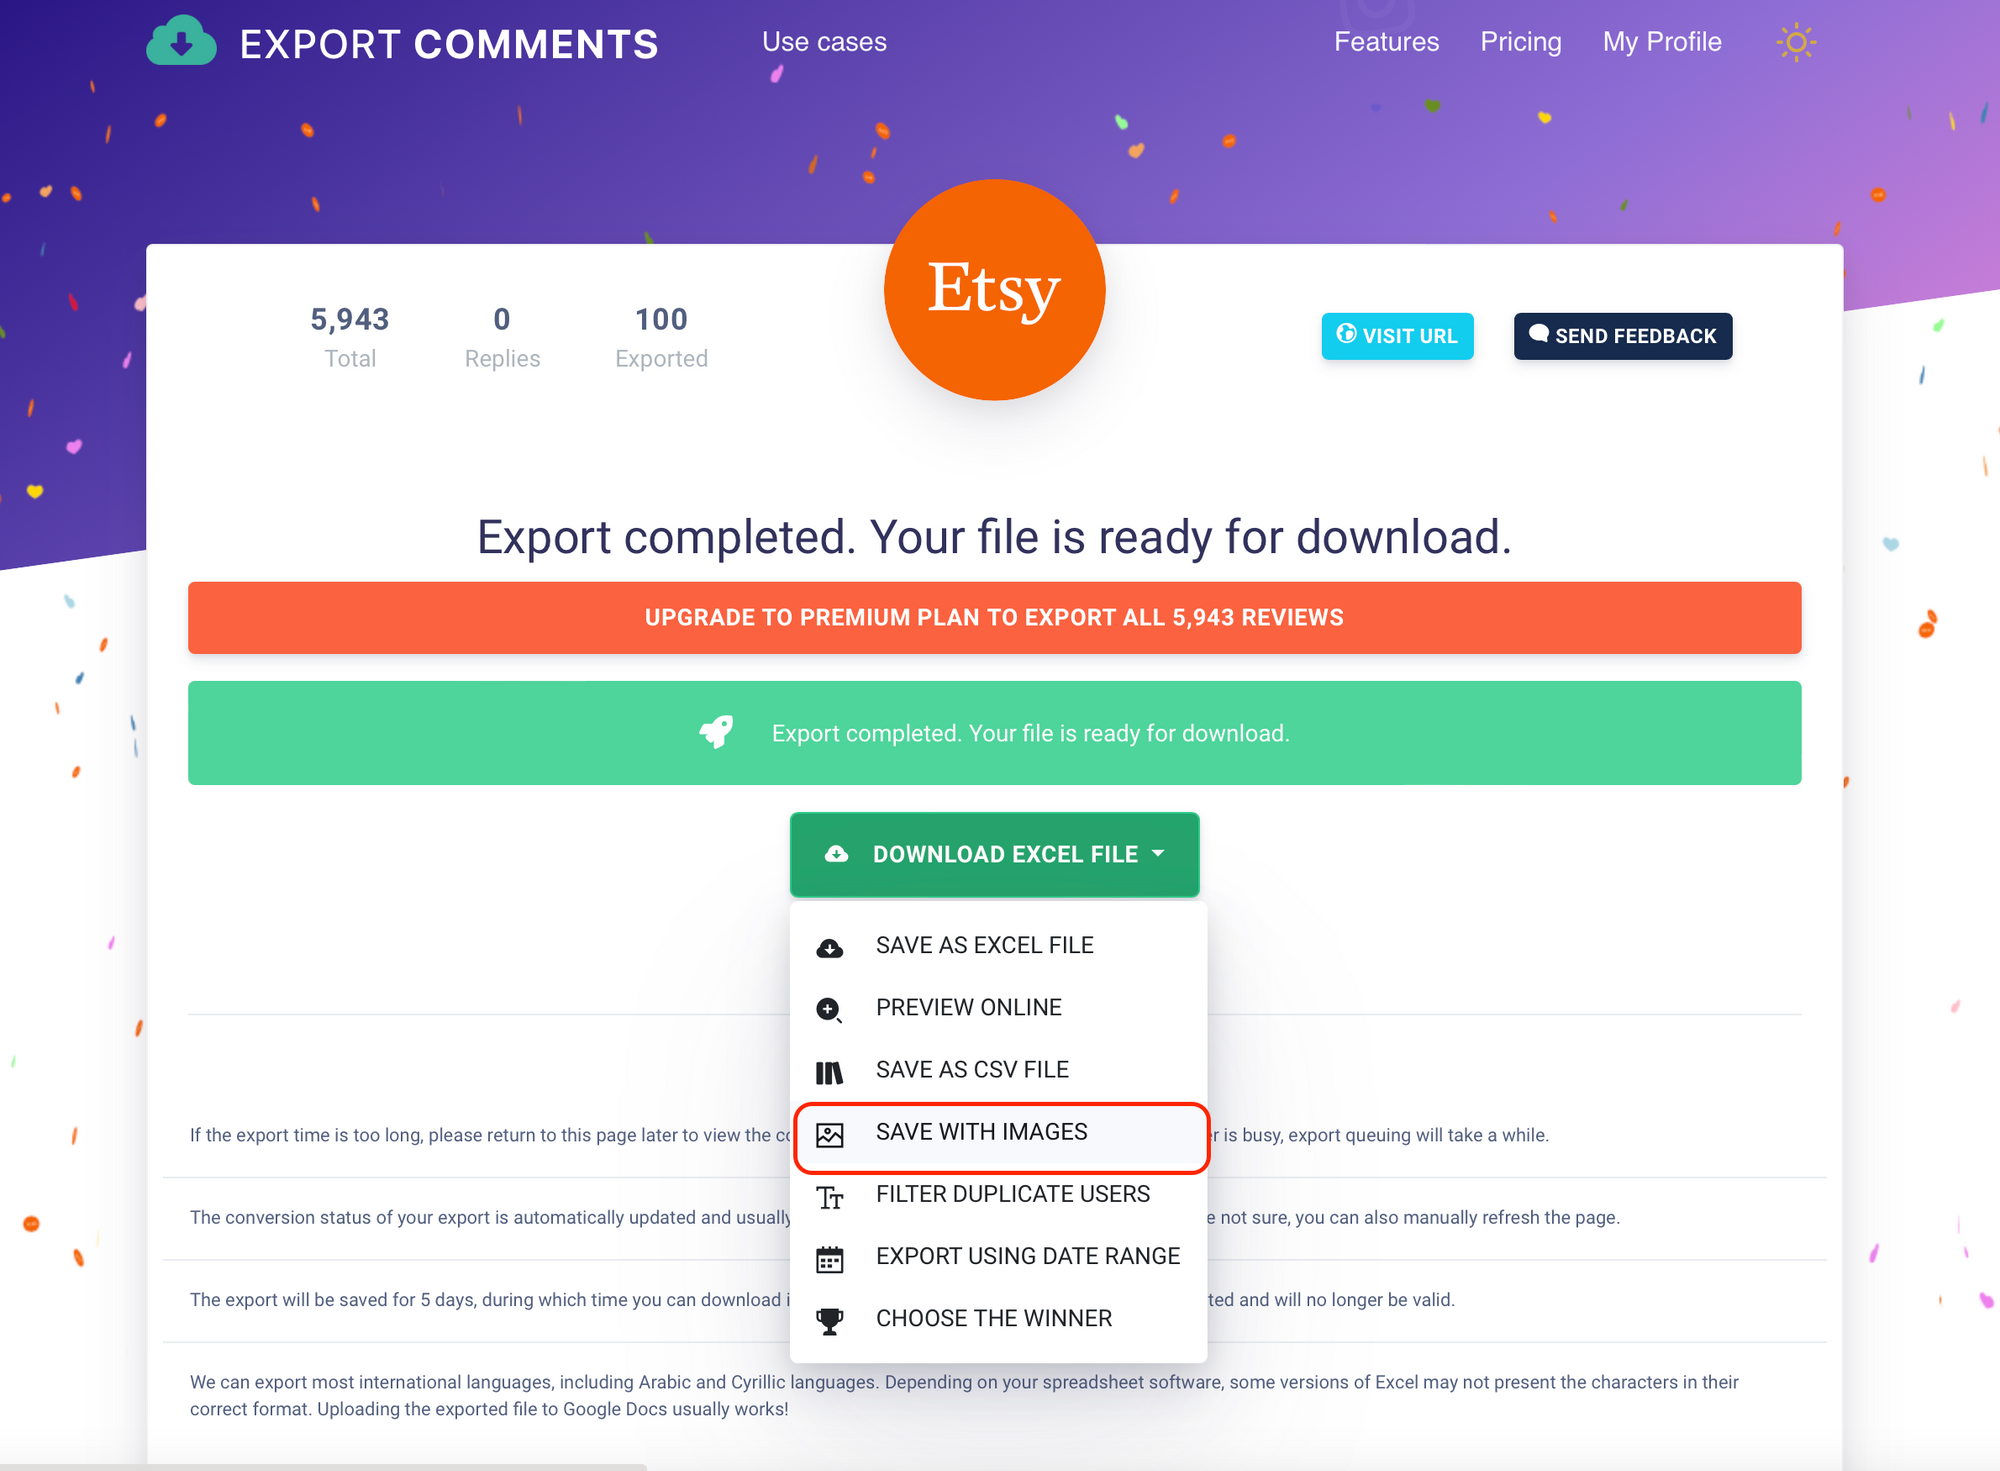 How to export Etsy Reviews